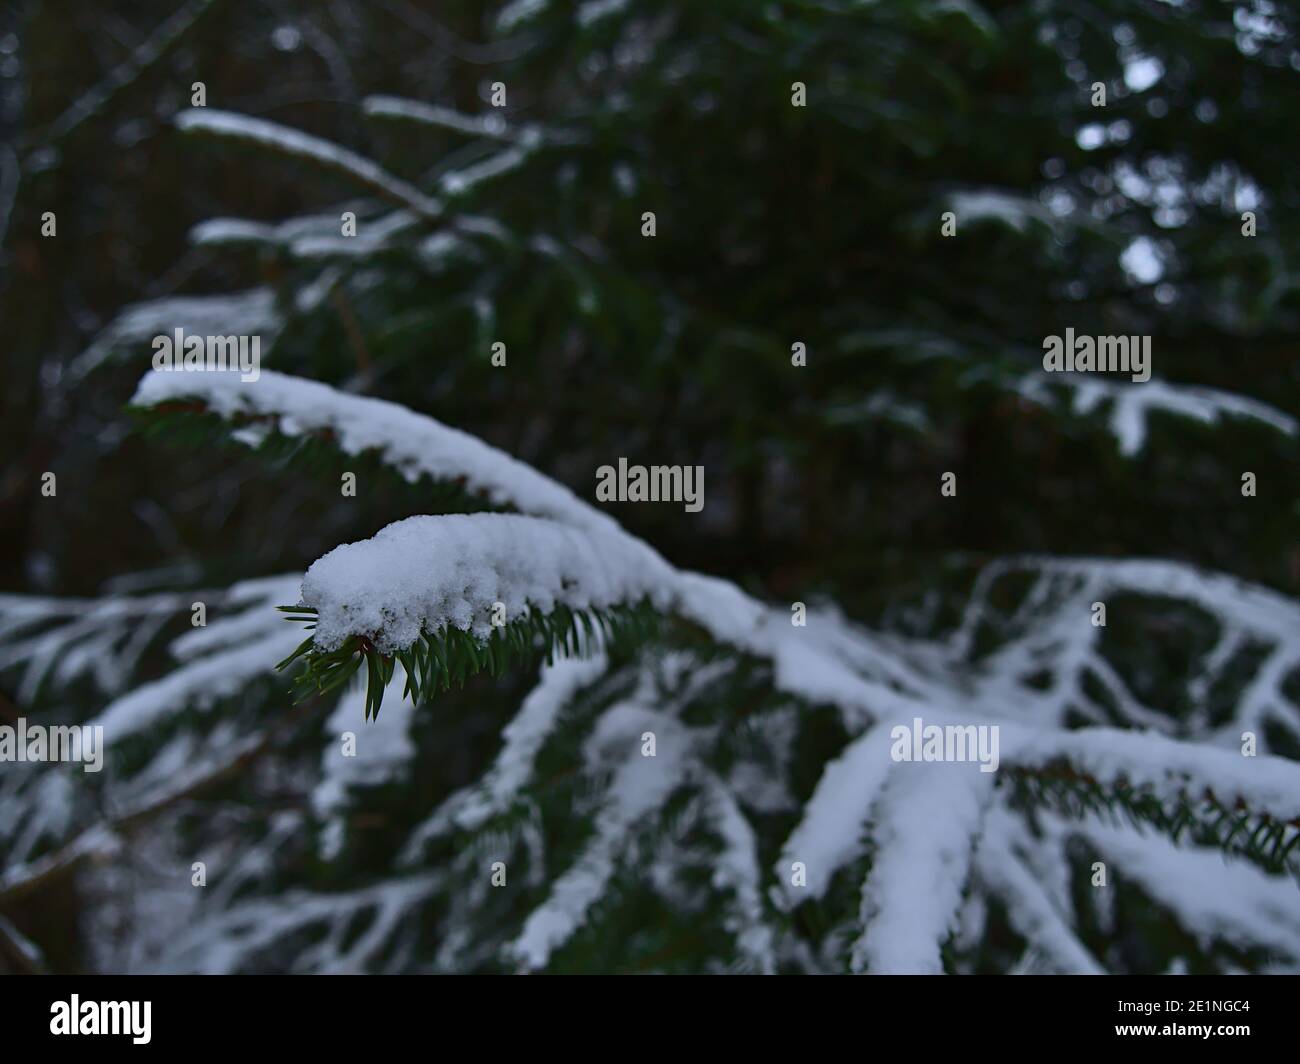 Closeup view of the branch of a coniferous fir tree with green colored sharp needles covered by snow in a forest near Gruibingen, Swabian Alb, Germany. Stock Photo